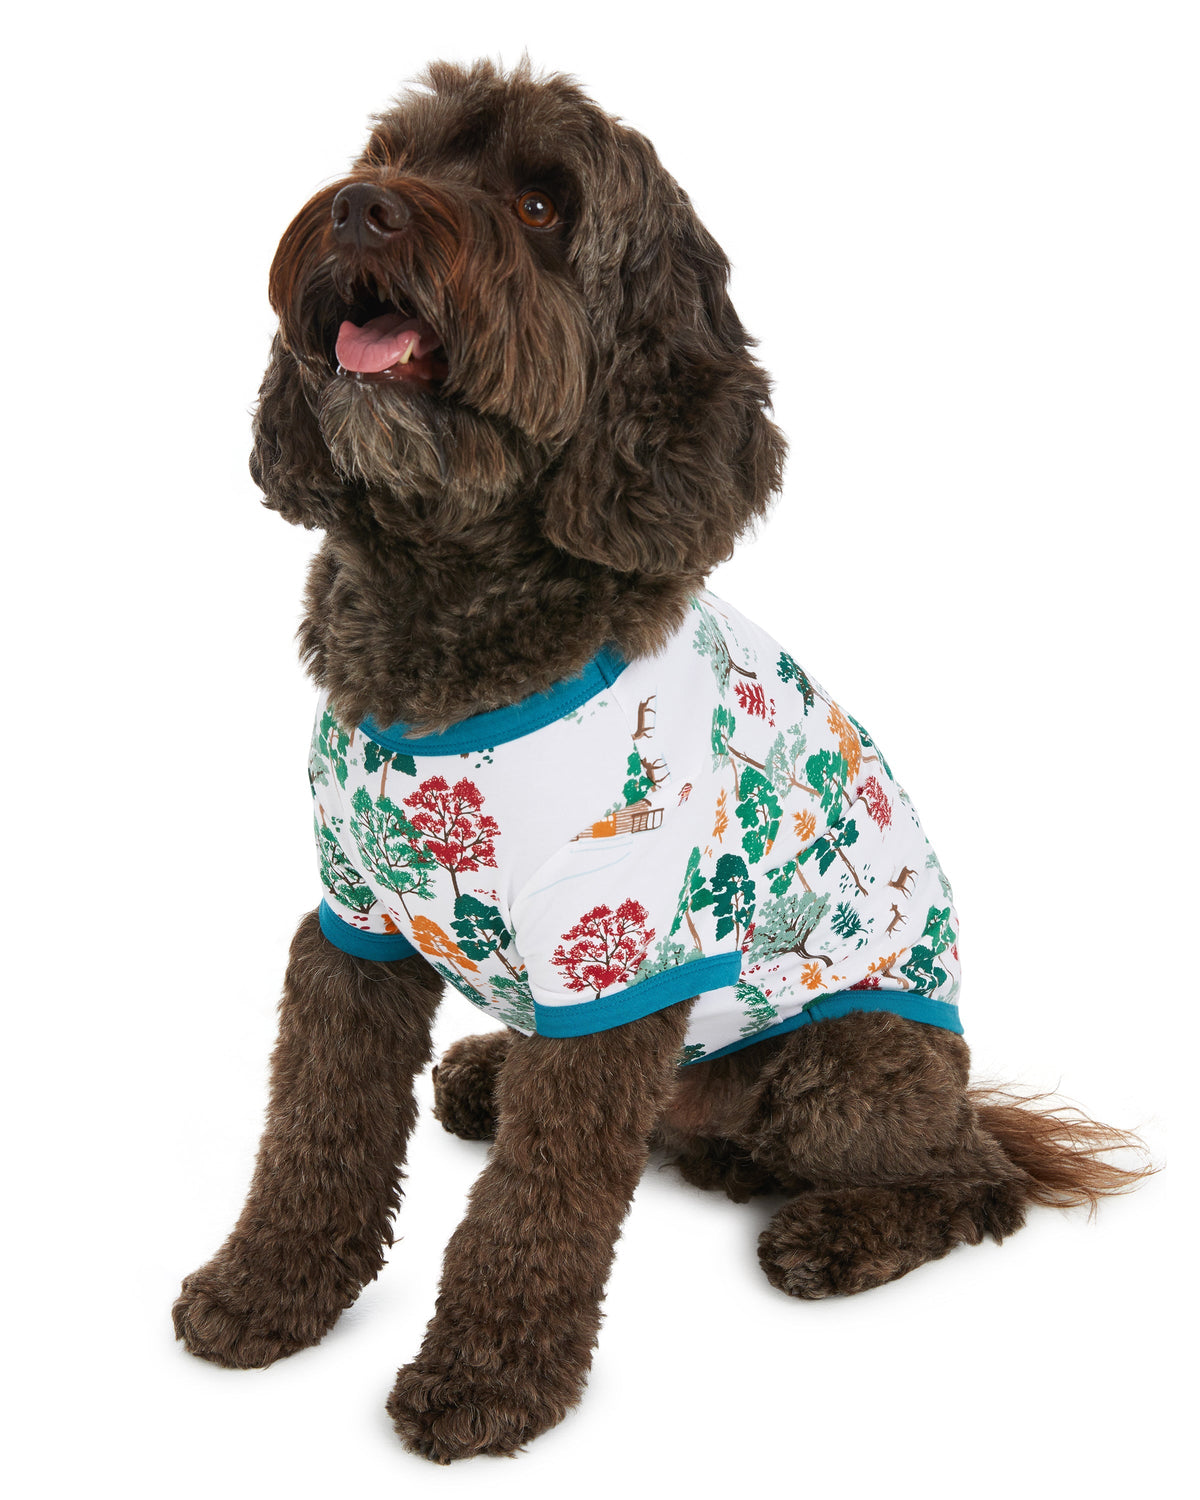 A dog wearing a white short sleeve pj set with tree pattern.